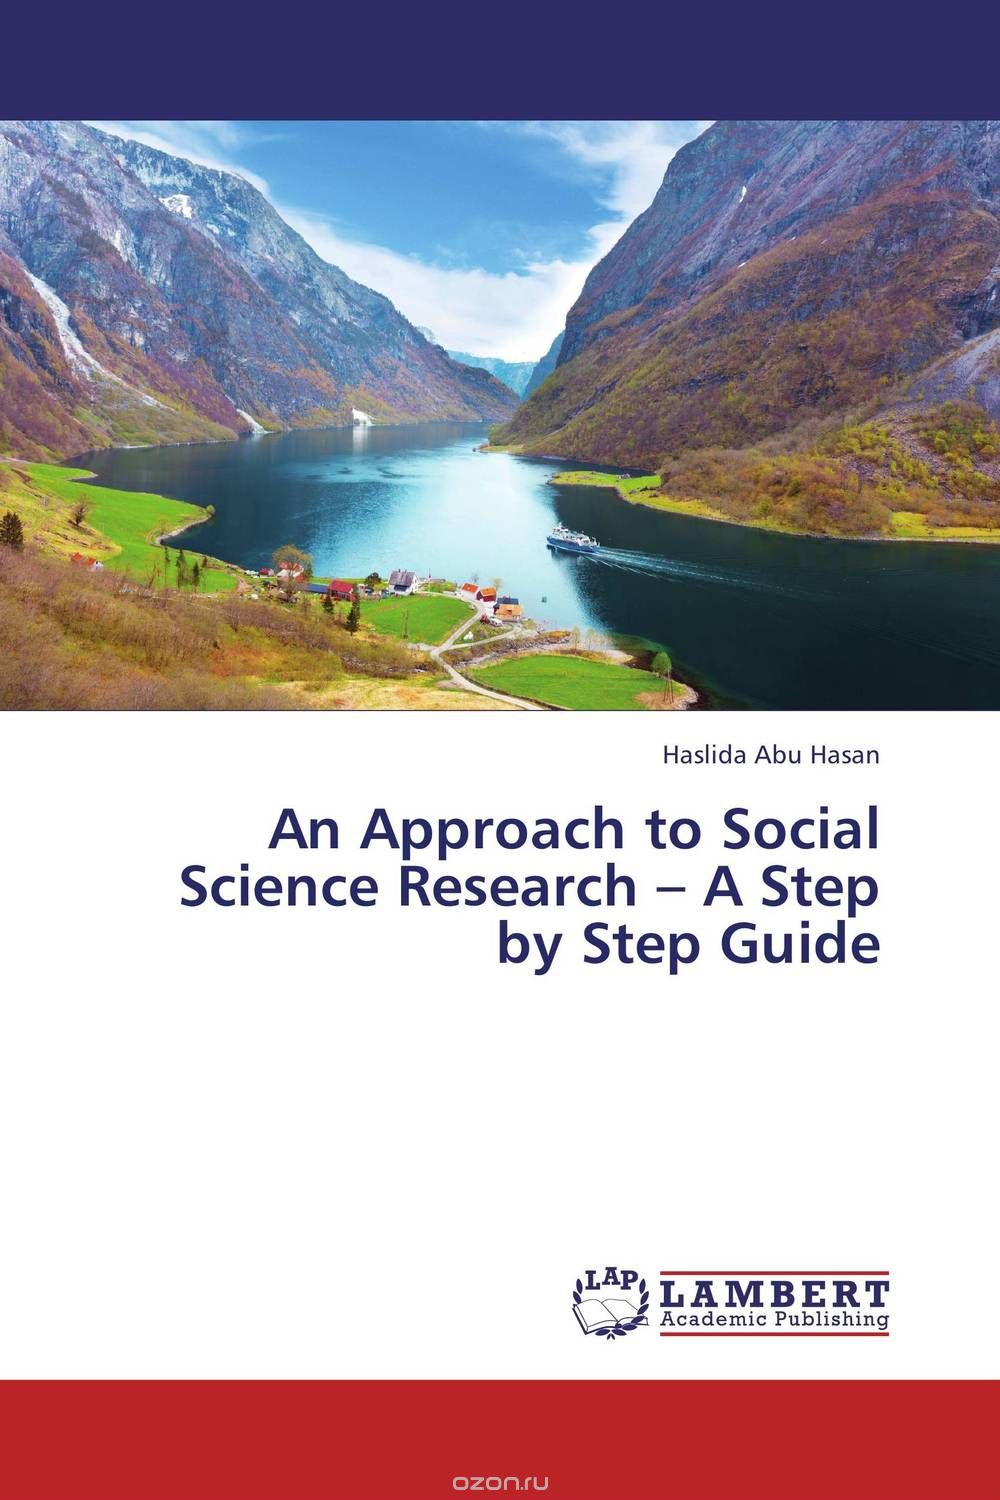 An Approach to Social Science Research – A Step by Step Guide